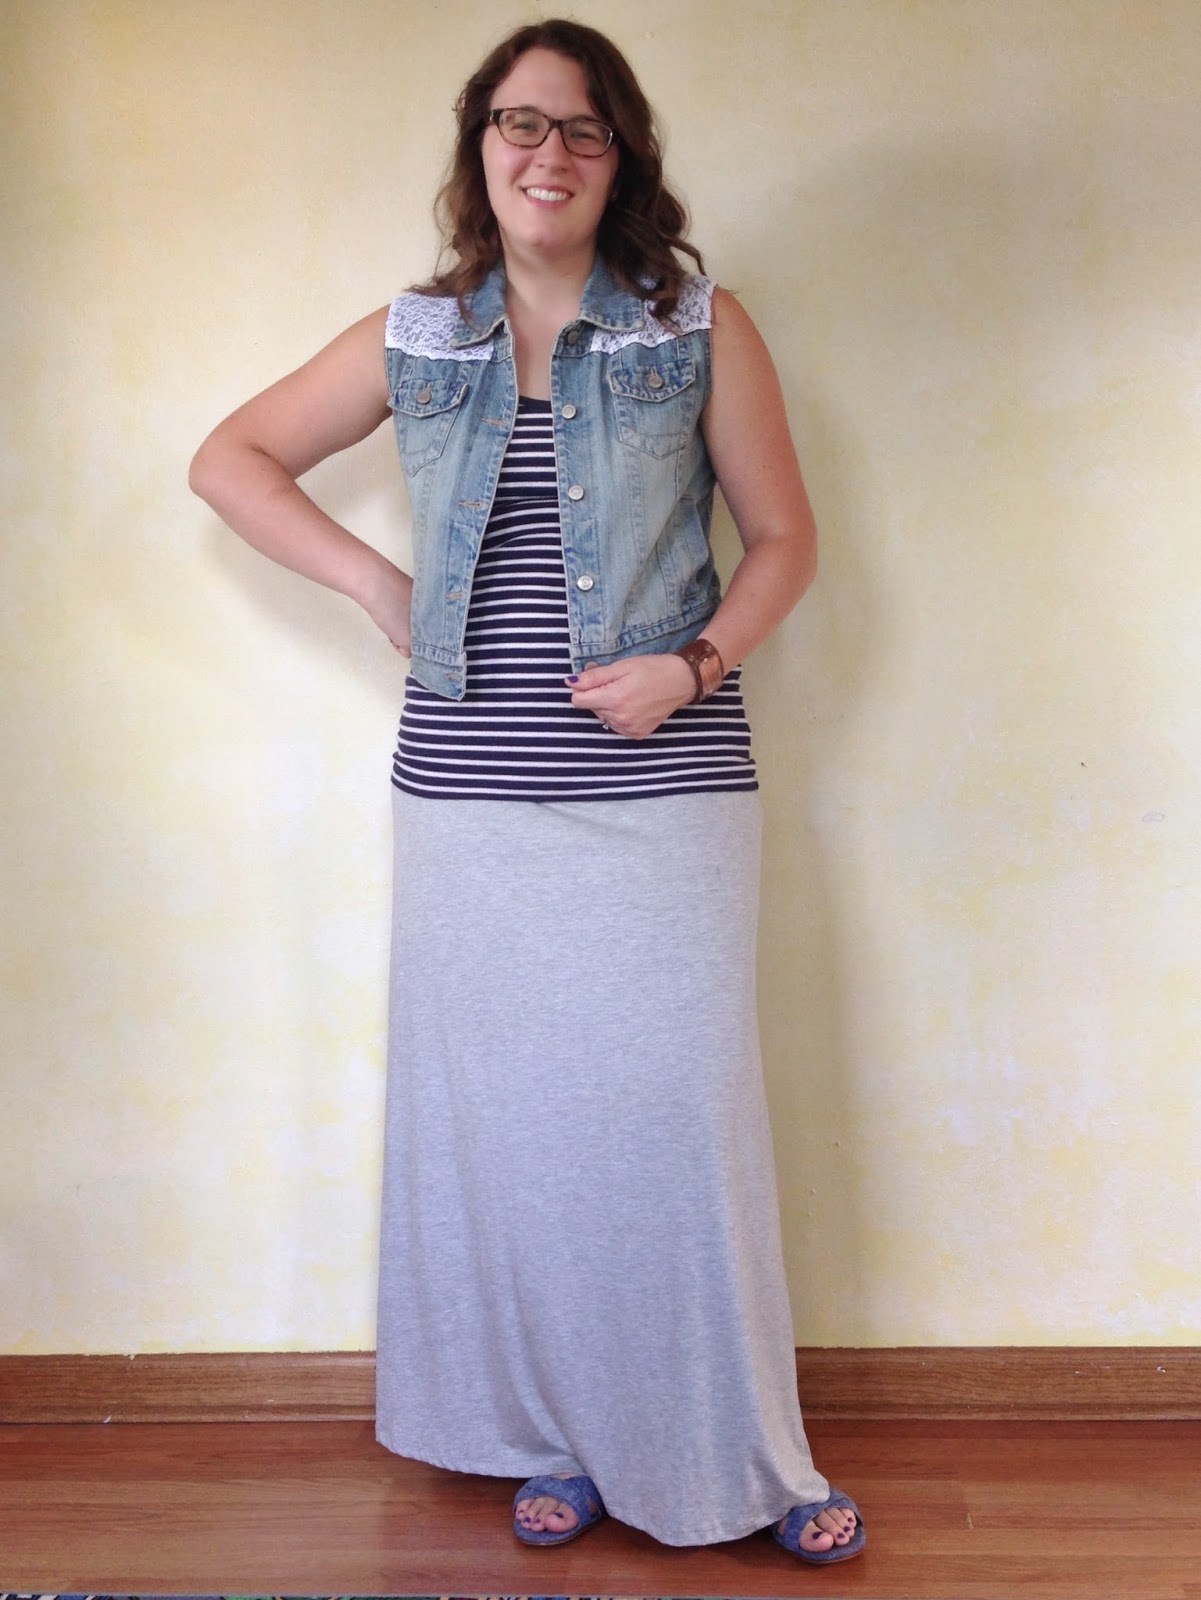 bybmg: Lessons in Fashion: Styling a Jean Vest